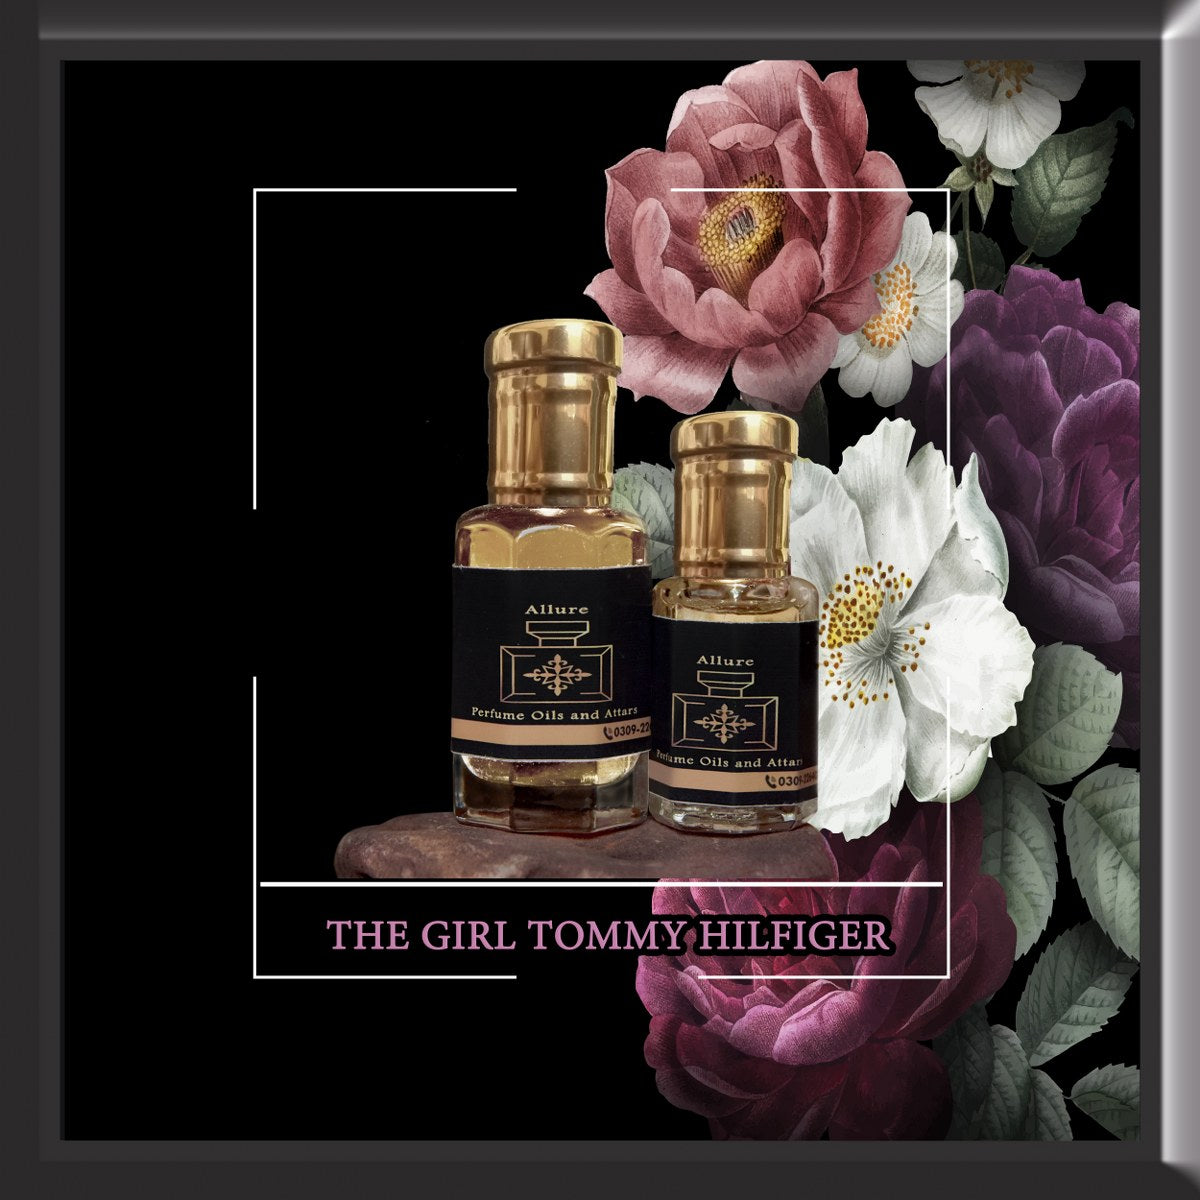 The Girl Tommy Hilfiger for women high quality perfume oil (attar)